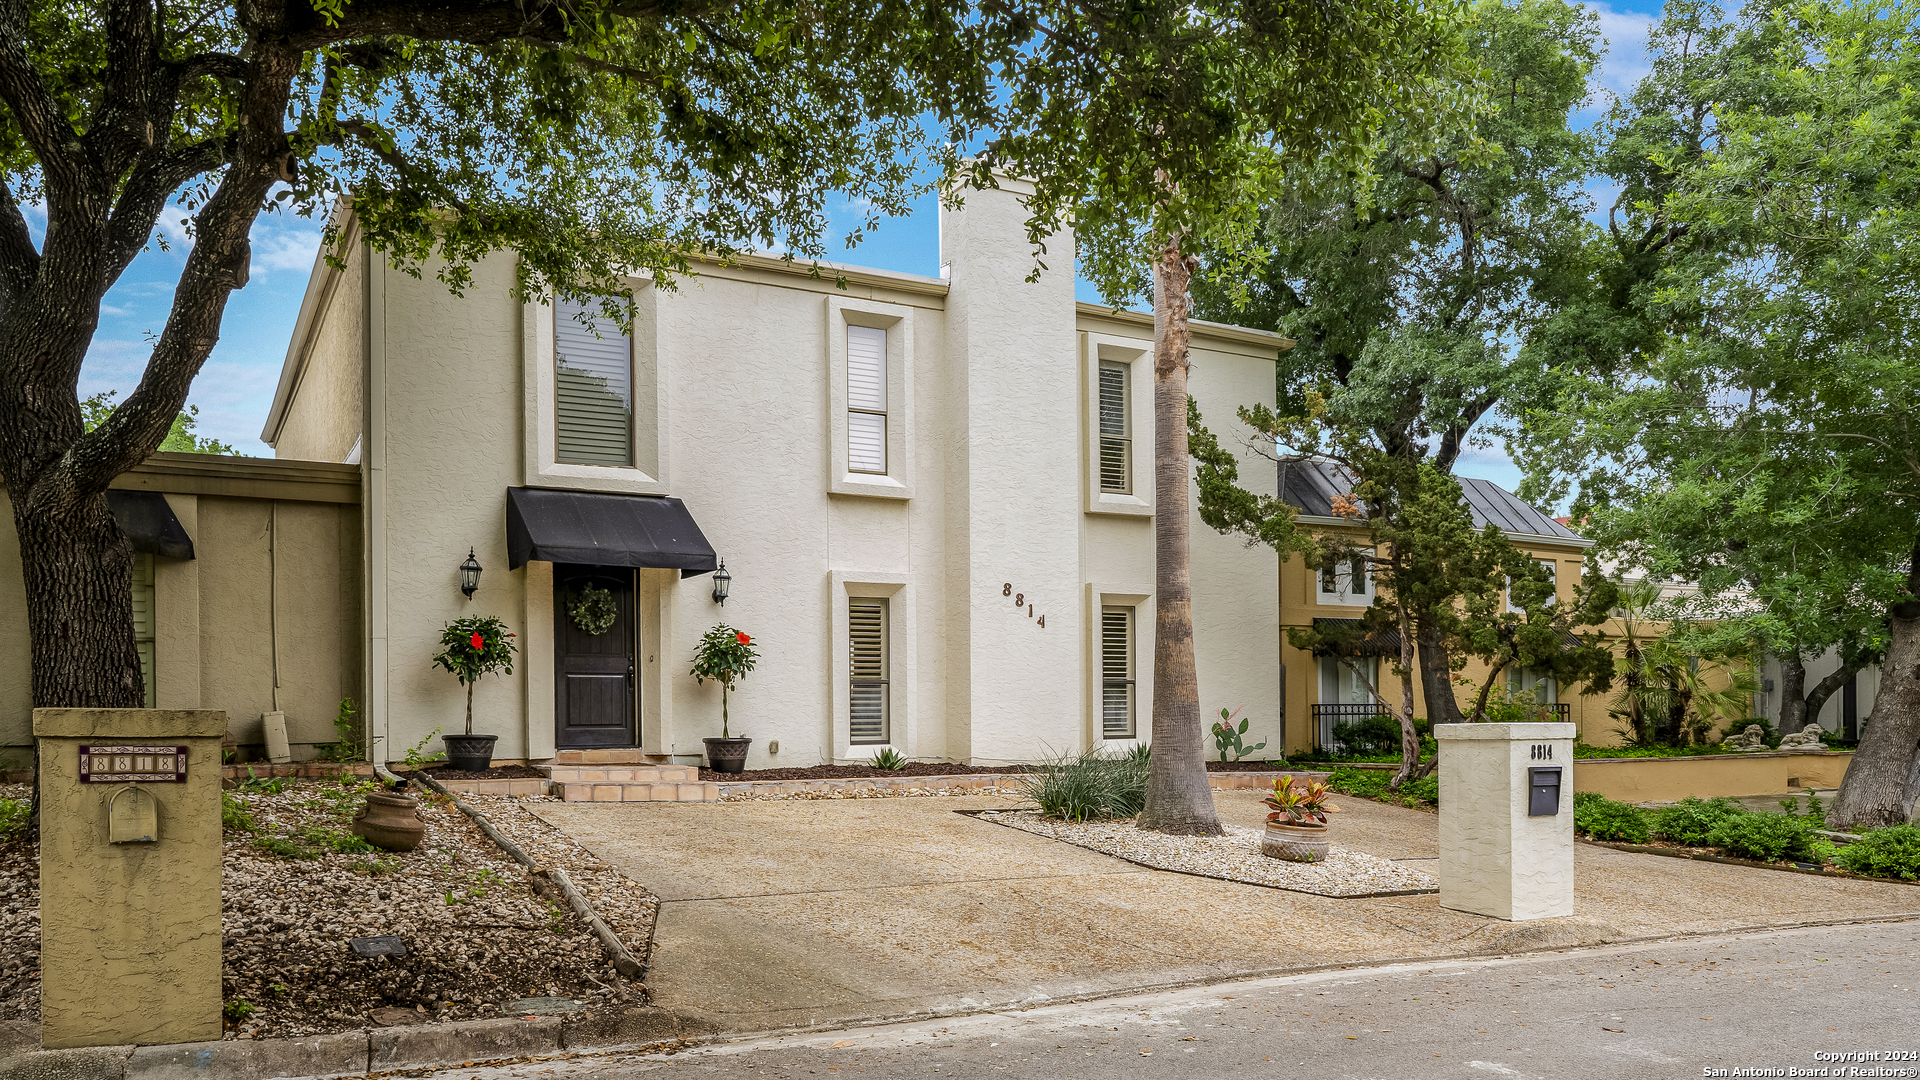 Photo of 8814 Carriage Dr in San Antonio, TX